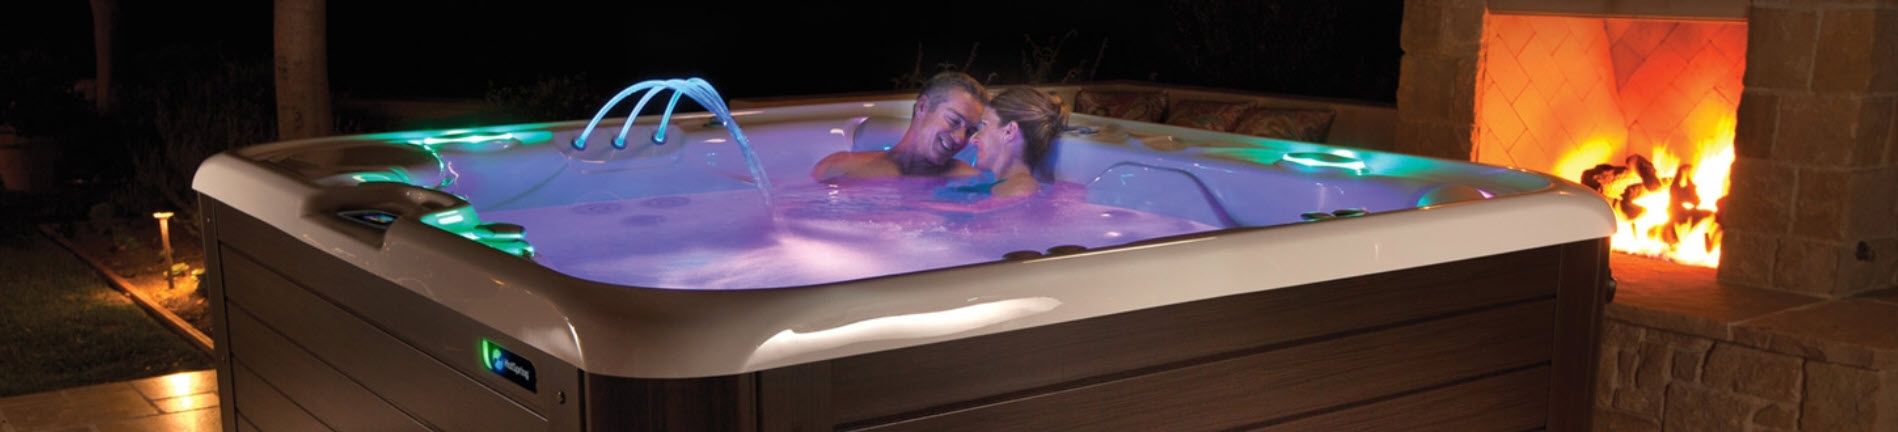 Use a Hydrotherapy for Natural Arthritis Pain Relief, Hot Tubs for Sale Vancouver